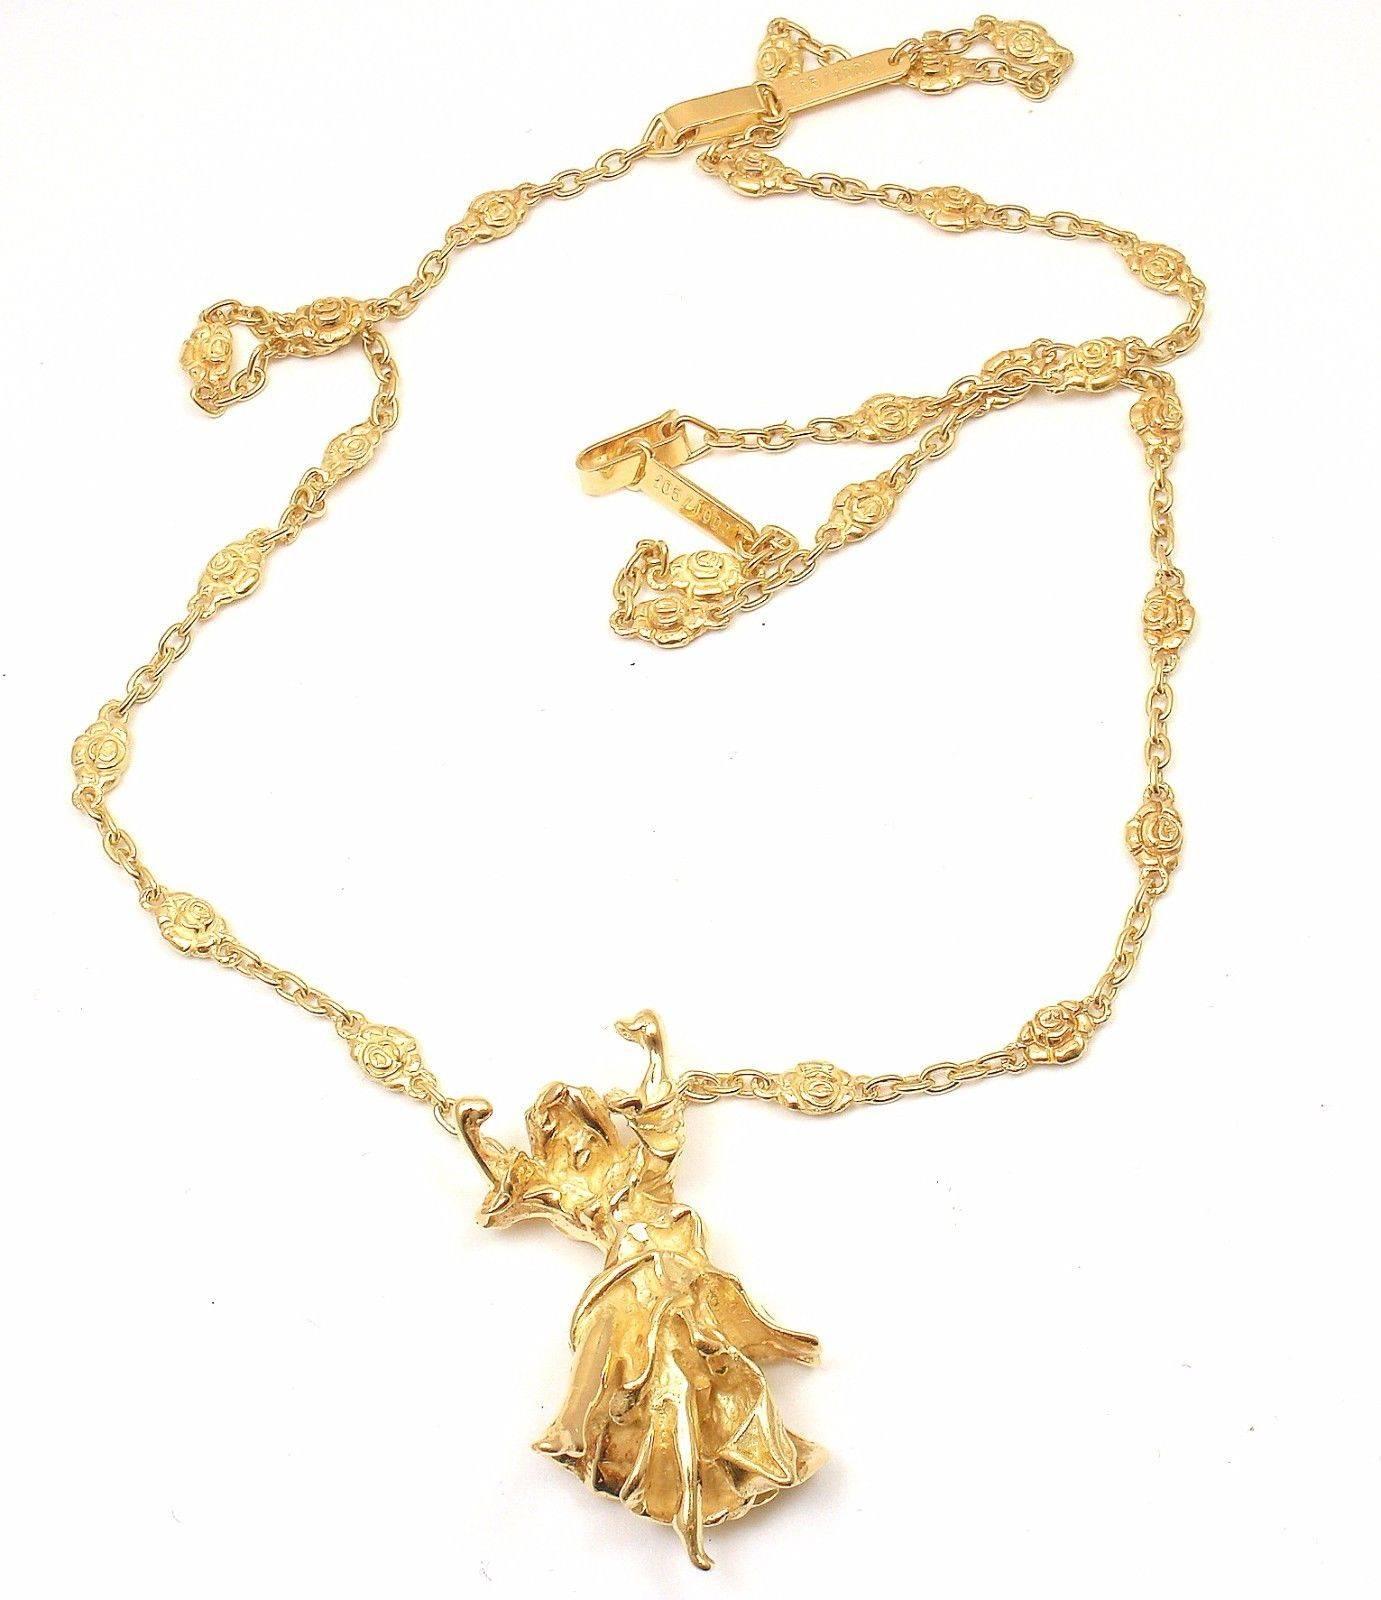 Limited Edition 18k Yellow Gold Salvador Dali Carmen La Crotalos Necklace Bracelet Set. 
This is a limited edition set from the 1980's, number 105 out of 1000 ever made.
Details: 
Length: 24.5